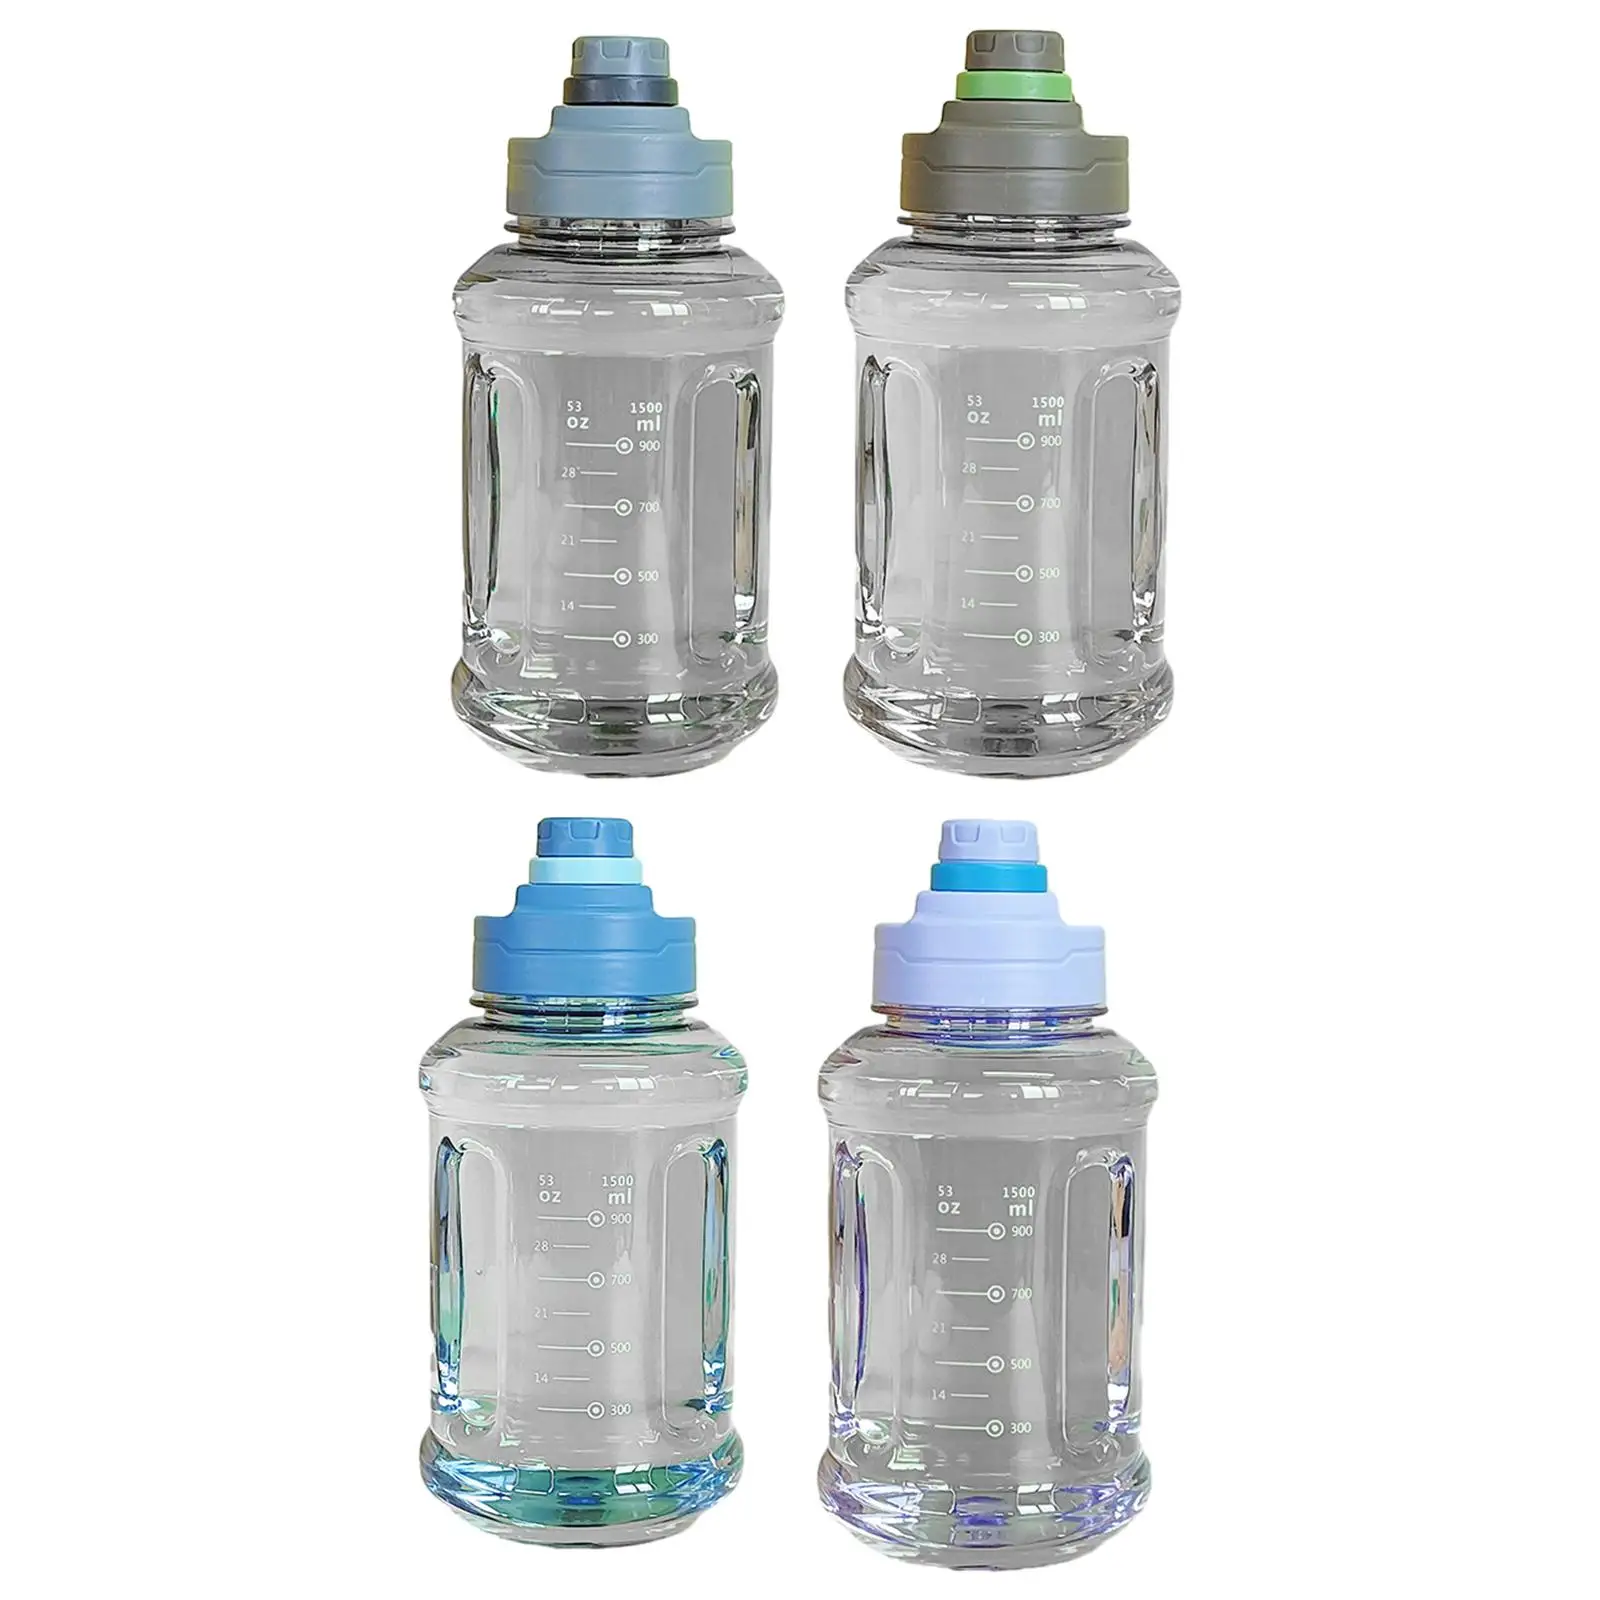 Gym Water Bottle Sports Water Bottle 1.5L Easy to Use for Sports and Travel Large Capacity Big Water Bottle Bottle